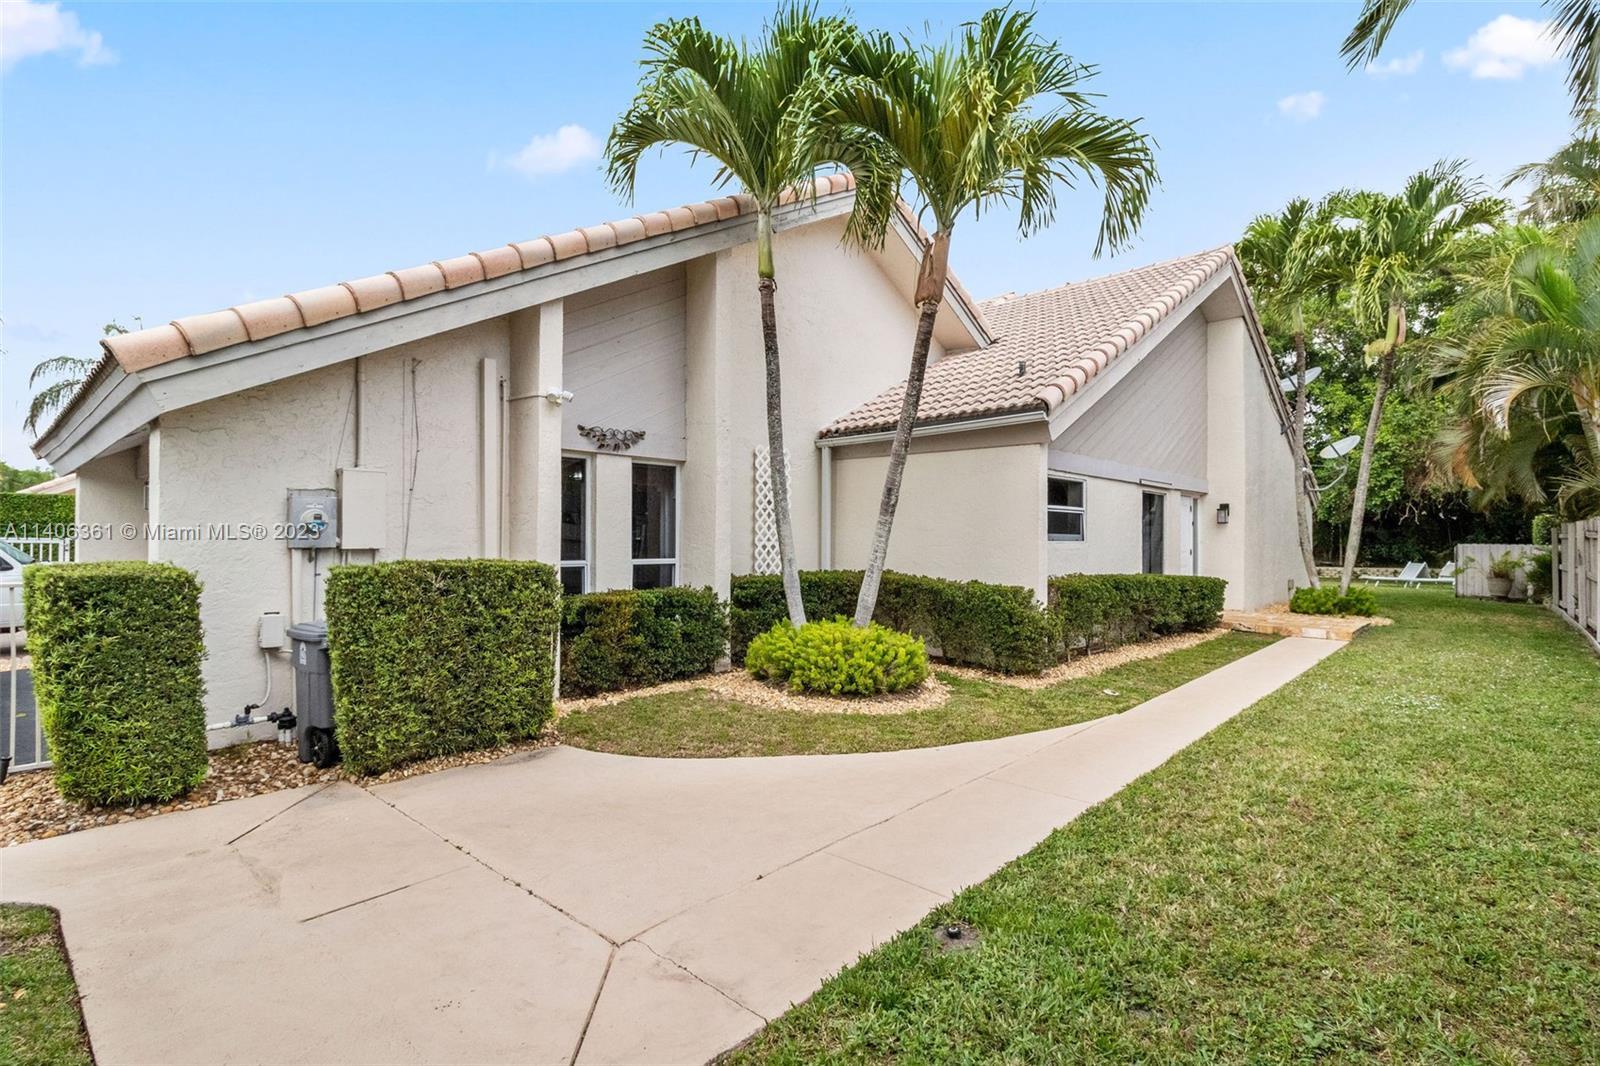 This gated community 3/2 remodeled house is rare to find. Located in a gated community with a very n